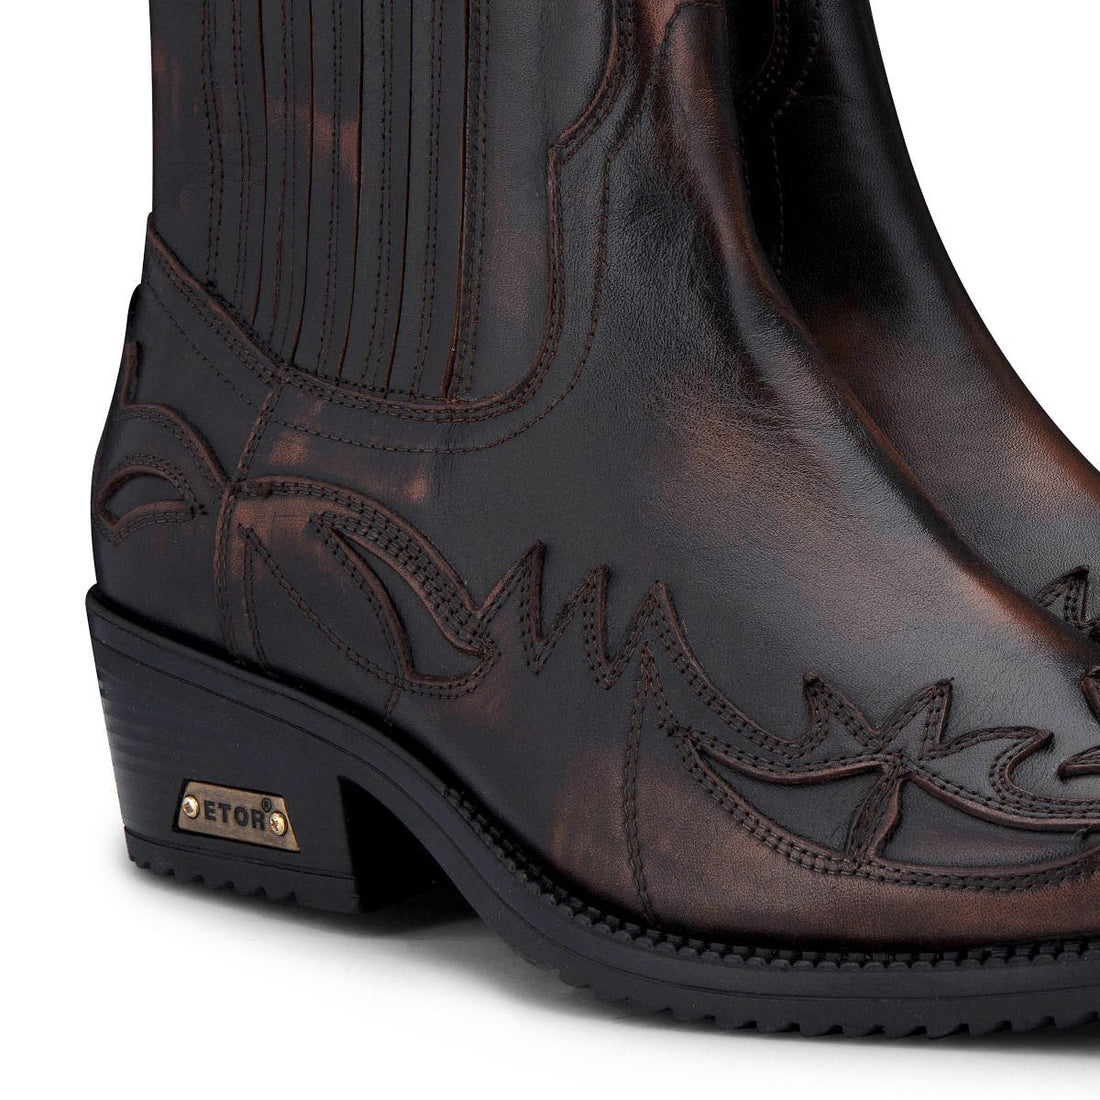 Mens Black/Brown Winklepicker Cowboy Ankle Boots - Upperclass Fashions 